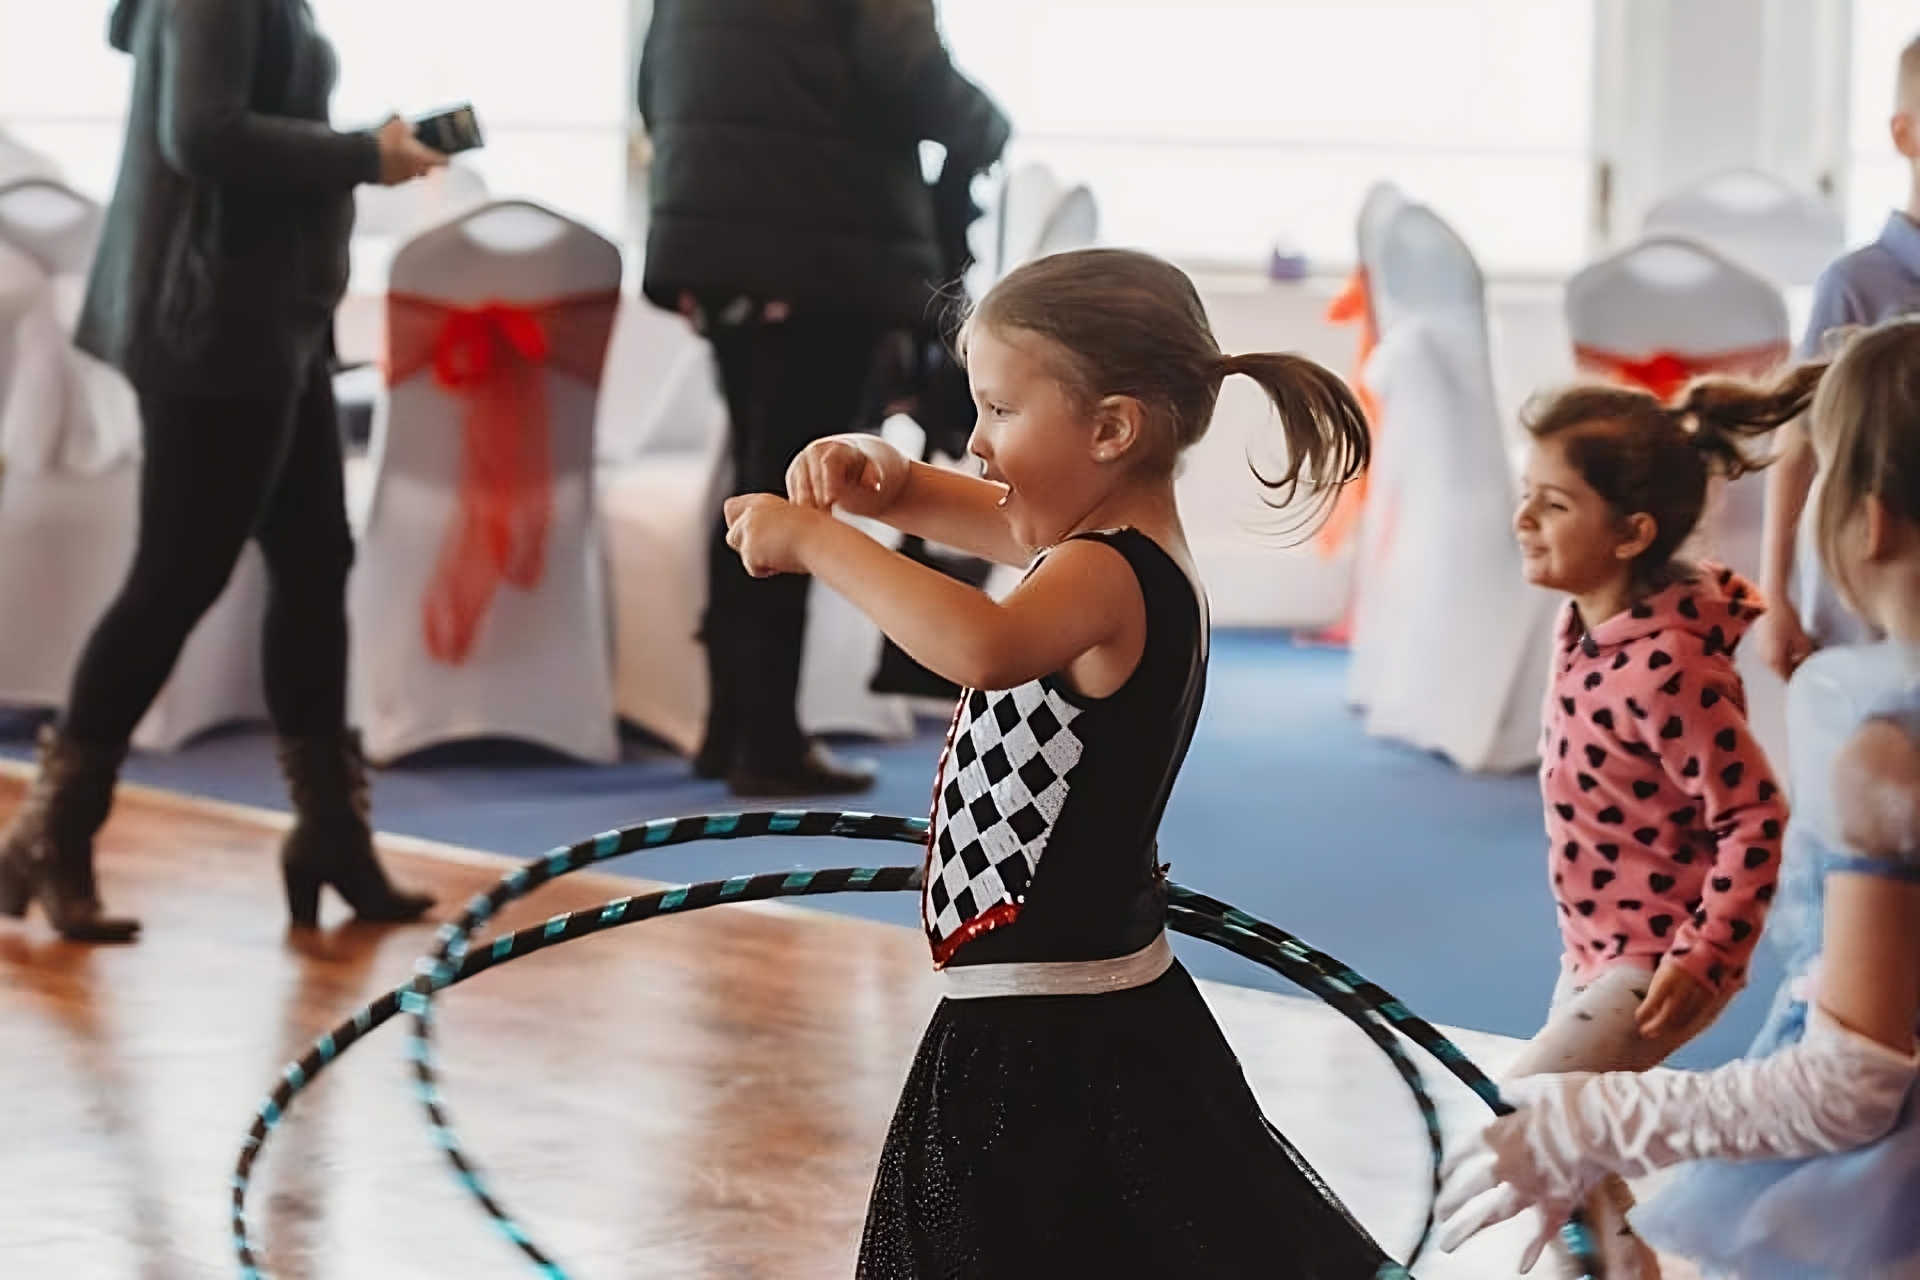 Little girl dressed in a black skirt and black and white top hula-hooping in the middle of a room with some other people around